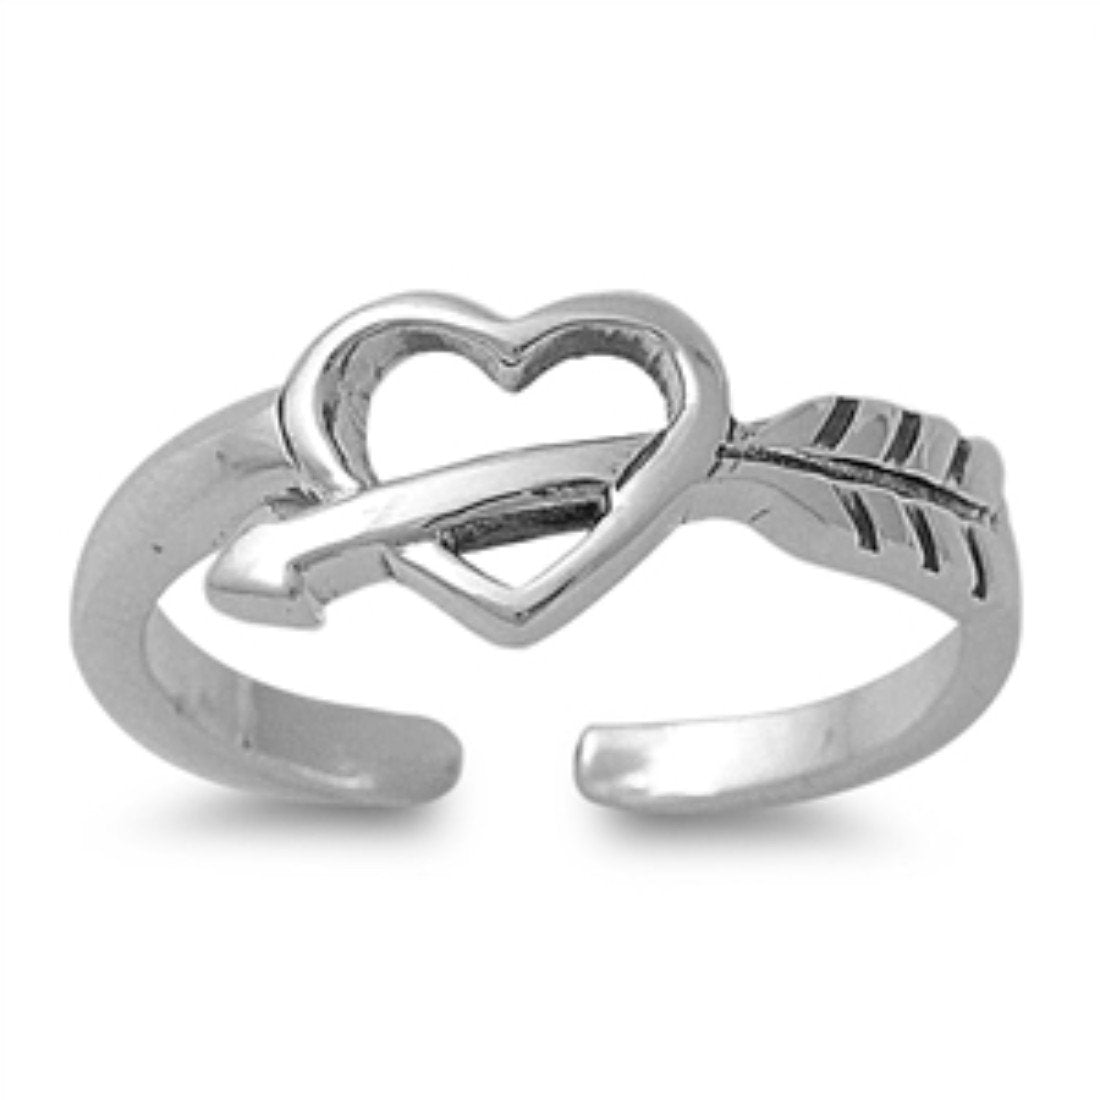 Heart With Arrow Silver Toe Ring Adjustable Band 925 Sterling Silver (7mm)